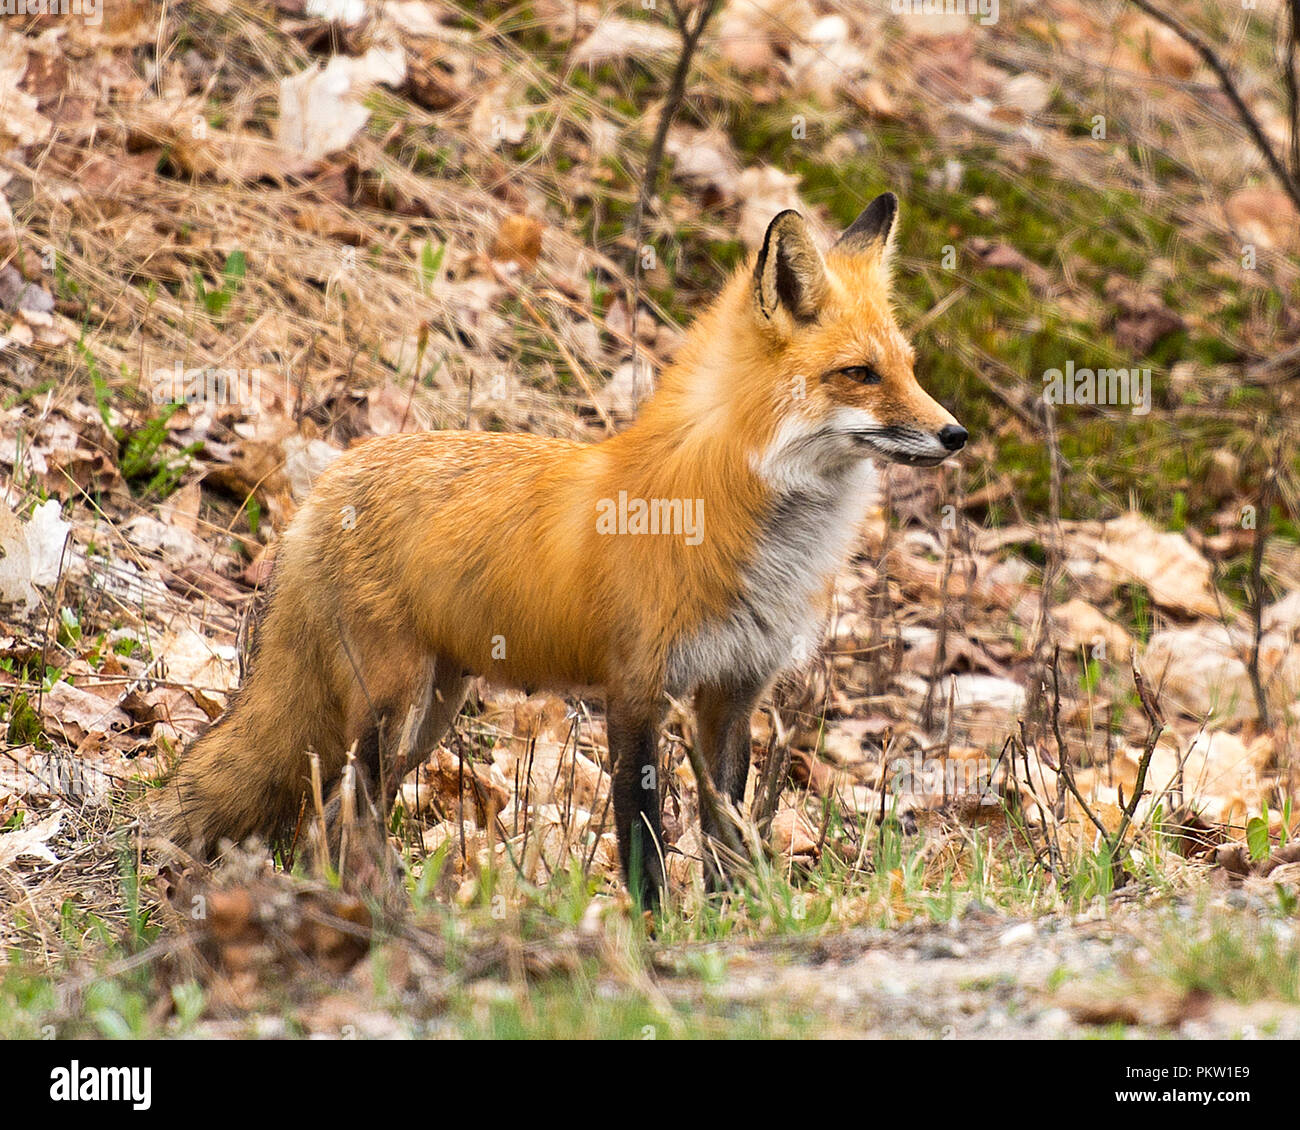 Red Fox animal with foliage background in its surrounding and environment displaying its fur, bushy tail. Stock Photo